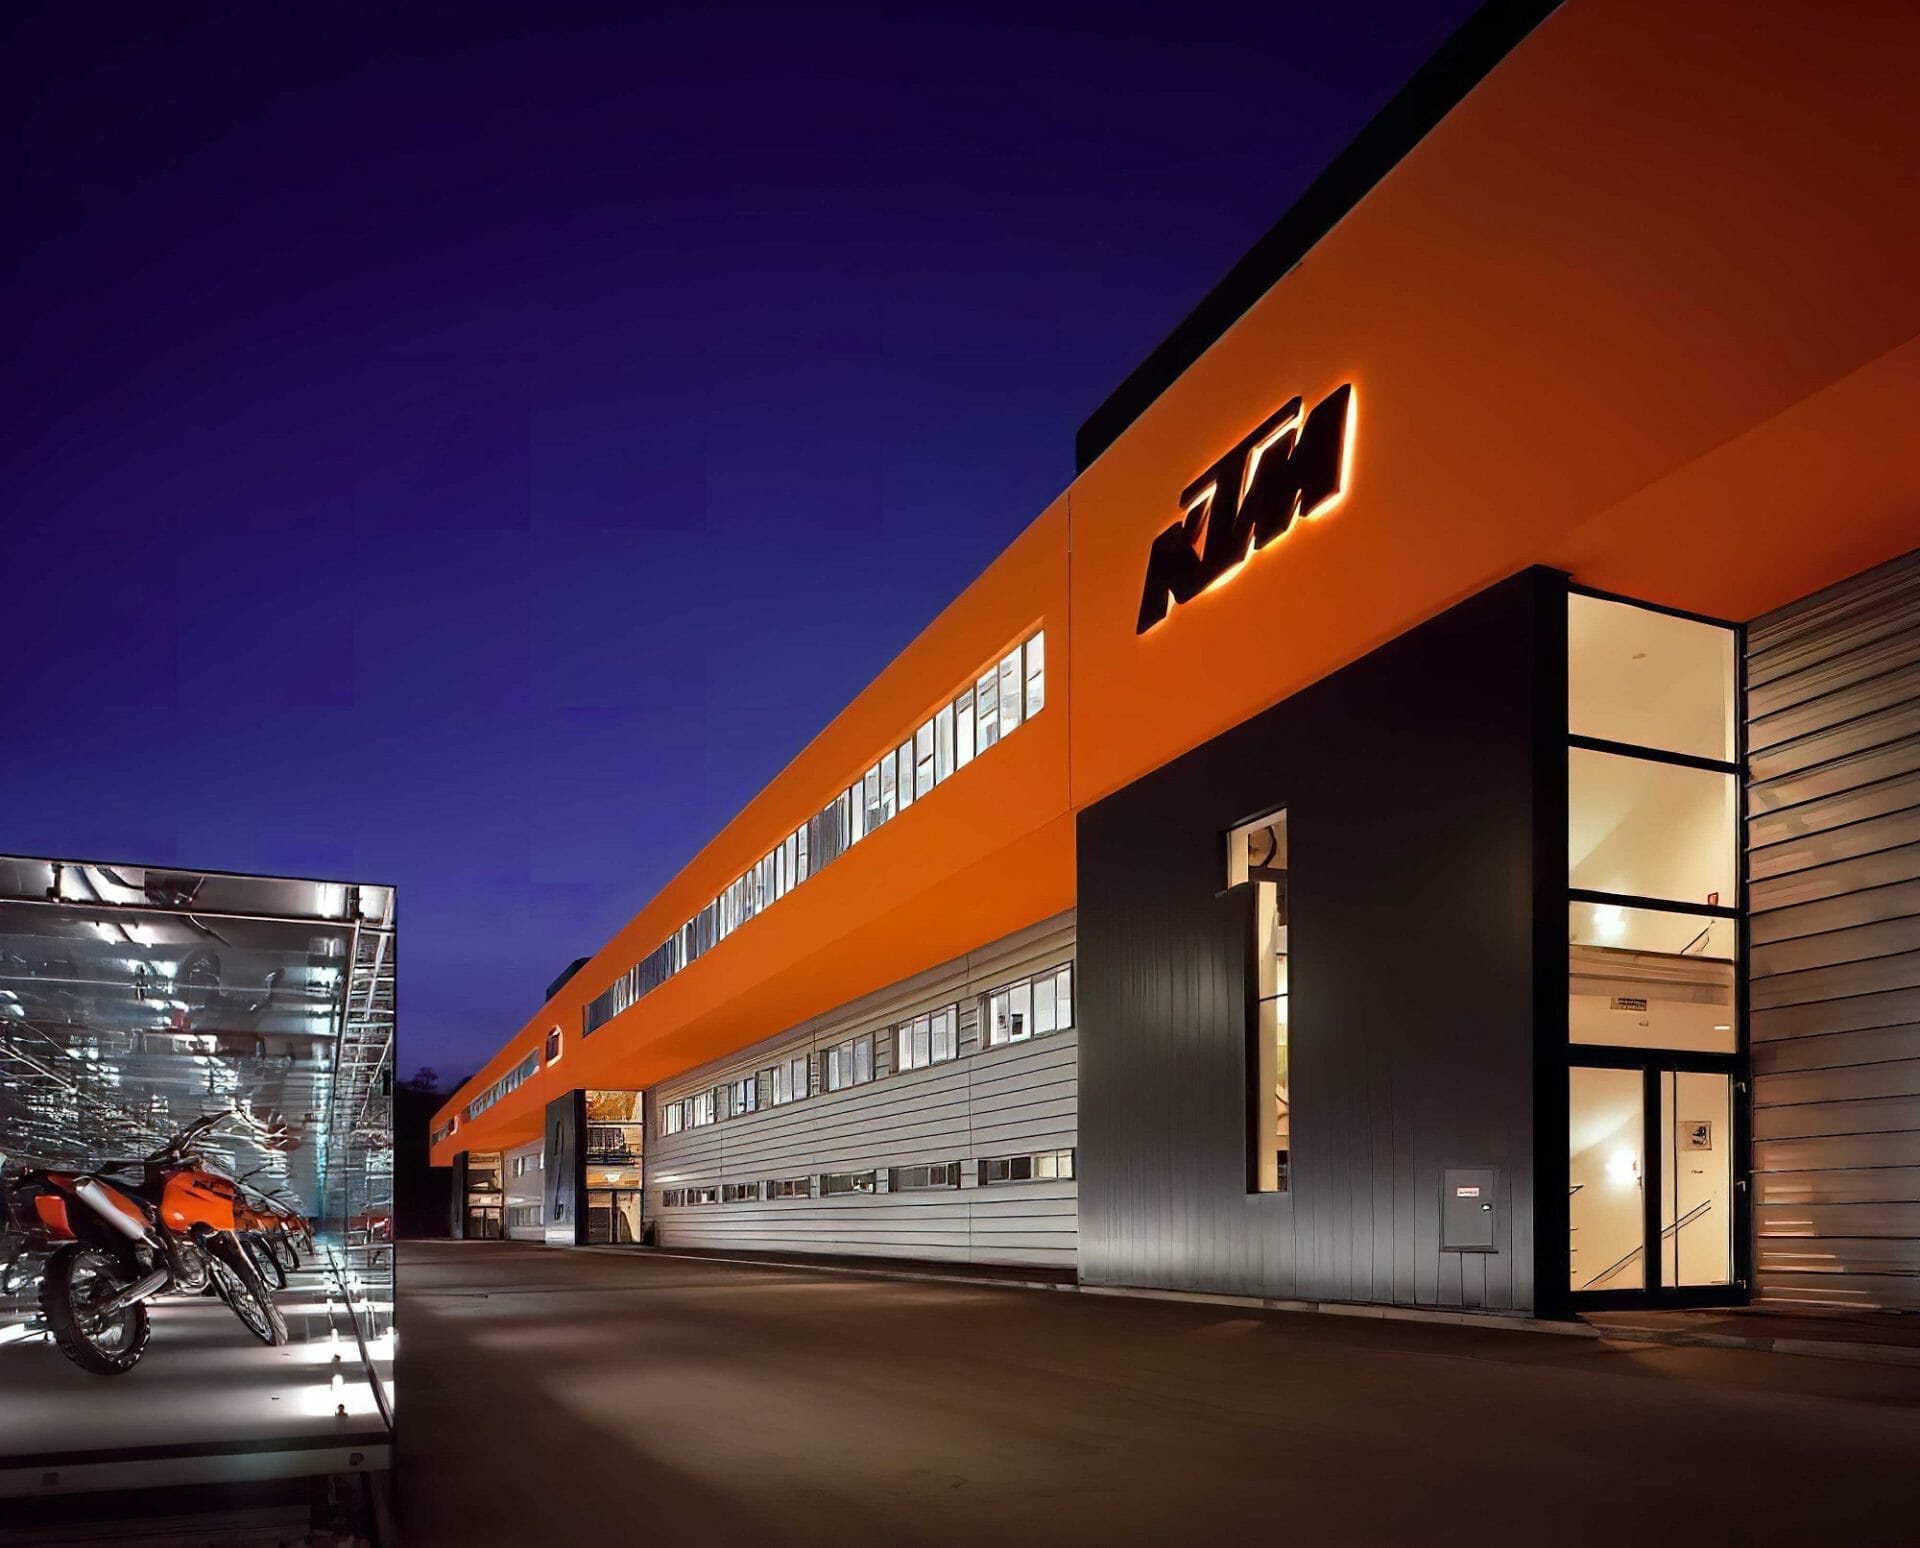 Job cuts at Pierer Mobility: Comprehensive changes at the KTM plant in Mattighofen